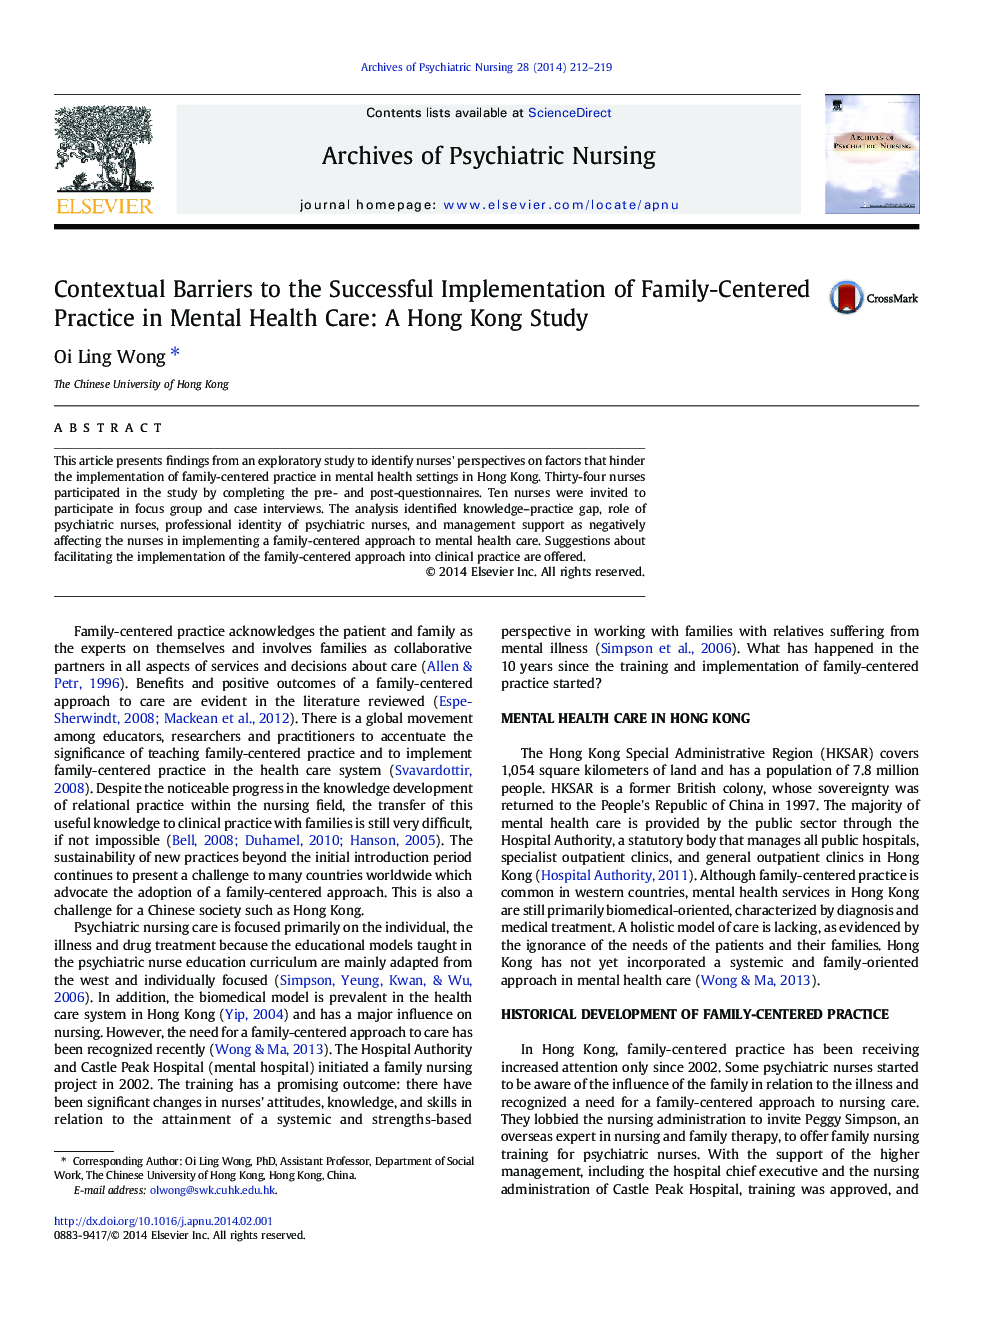 Contextual Barriers to the Successful Implementation of Family-Centered Practice in Mental Health Care: A Hong Kong Study